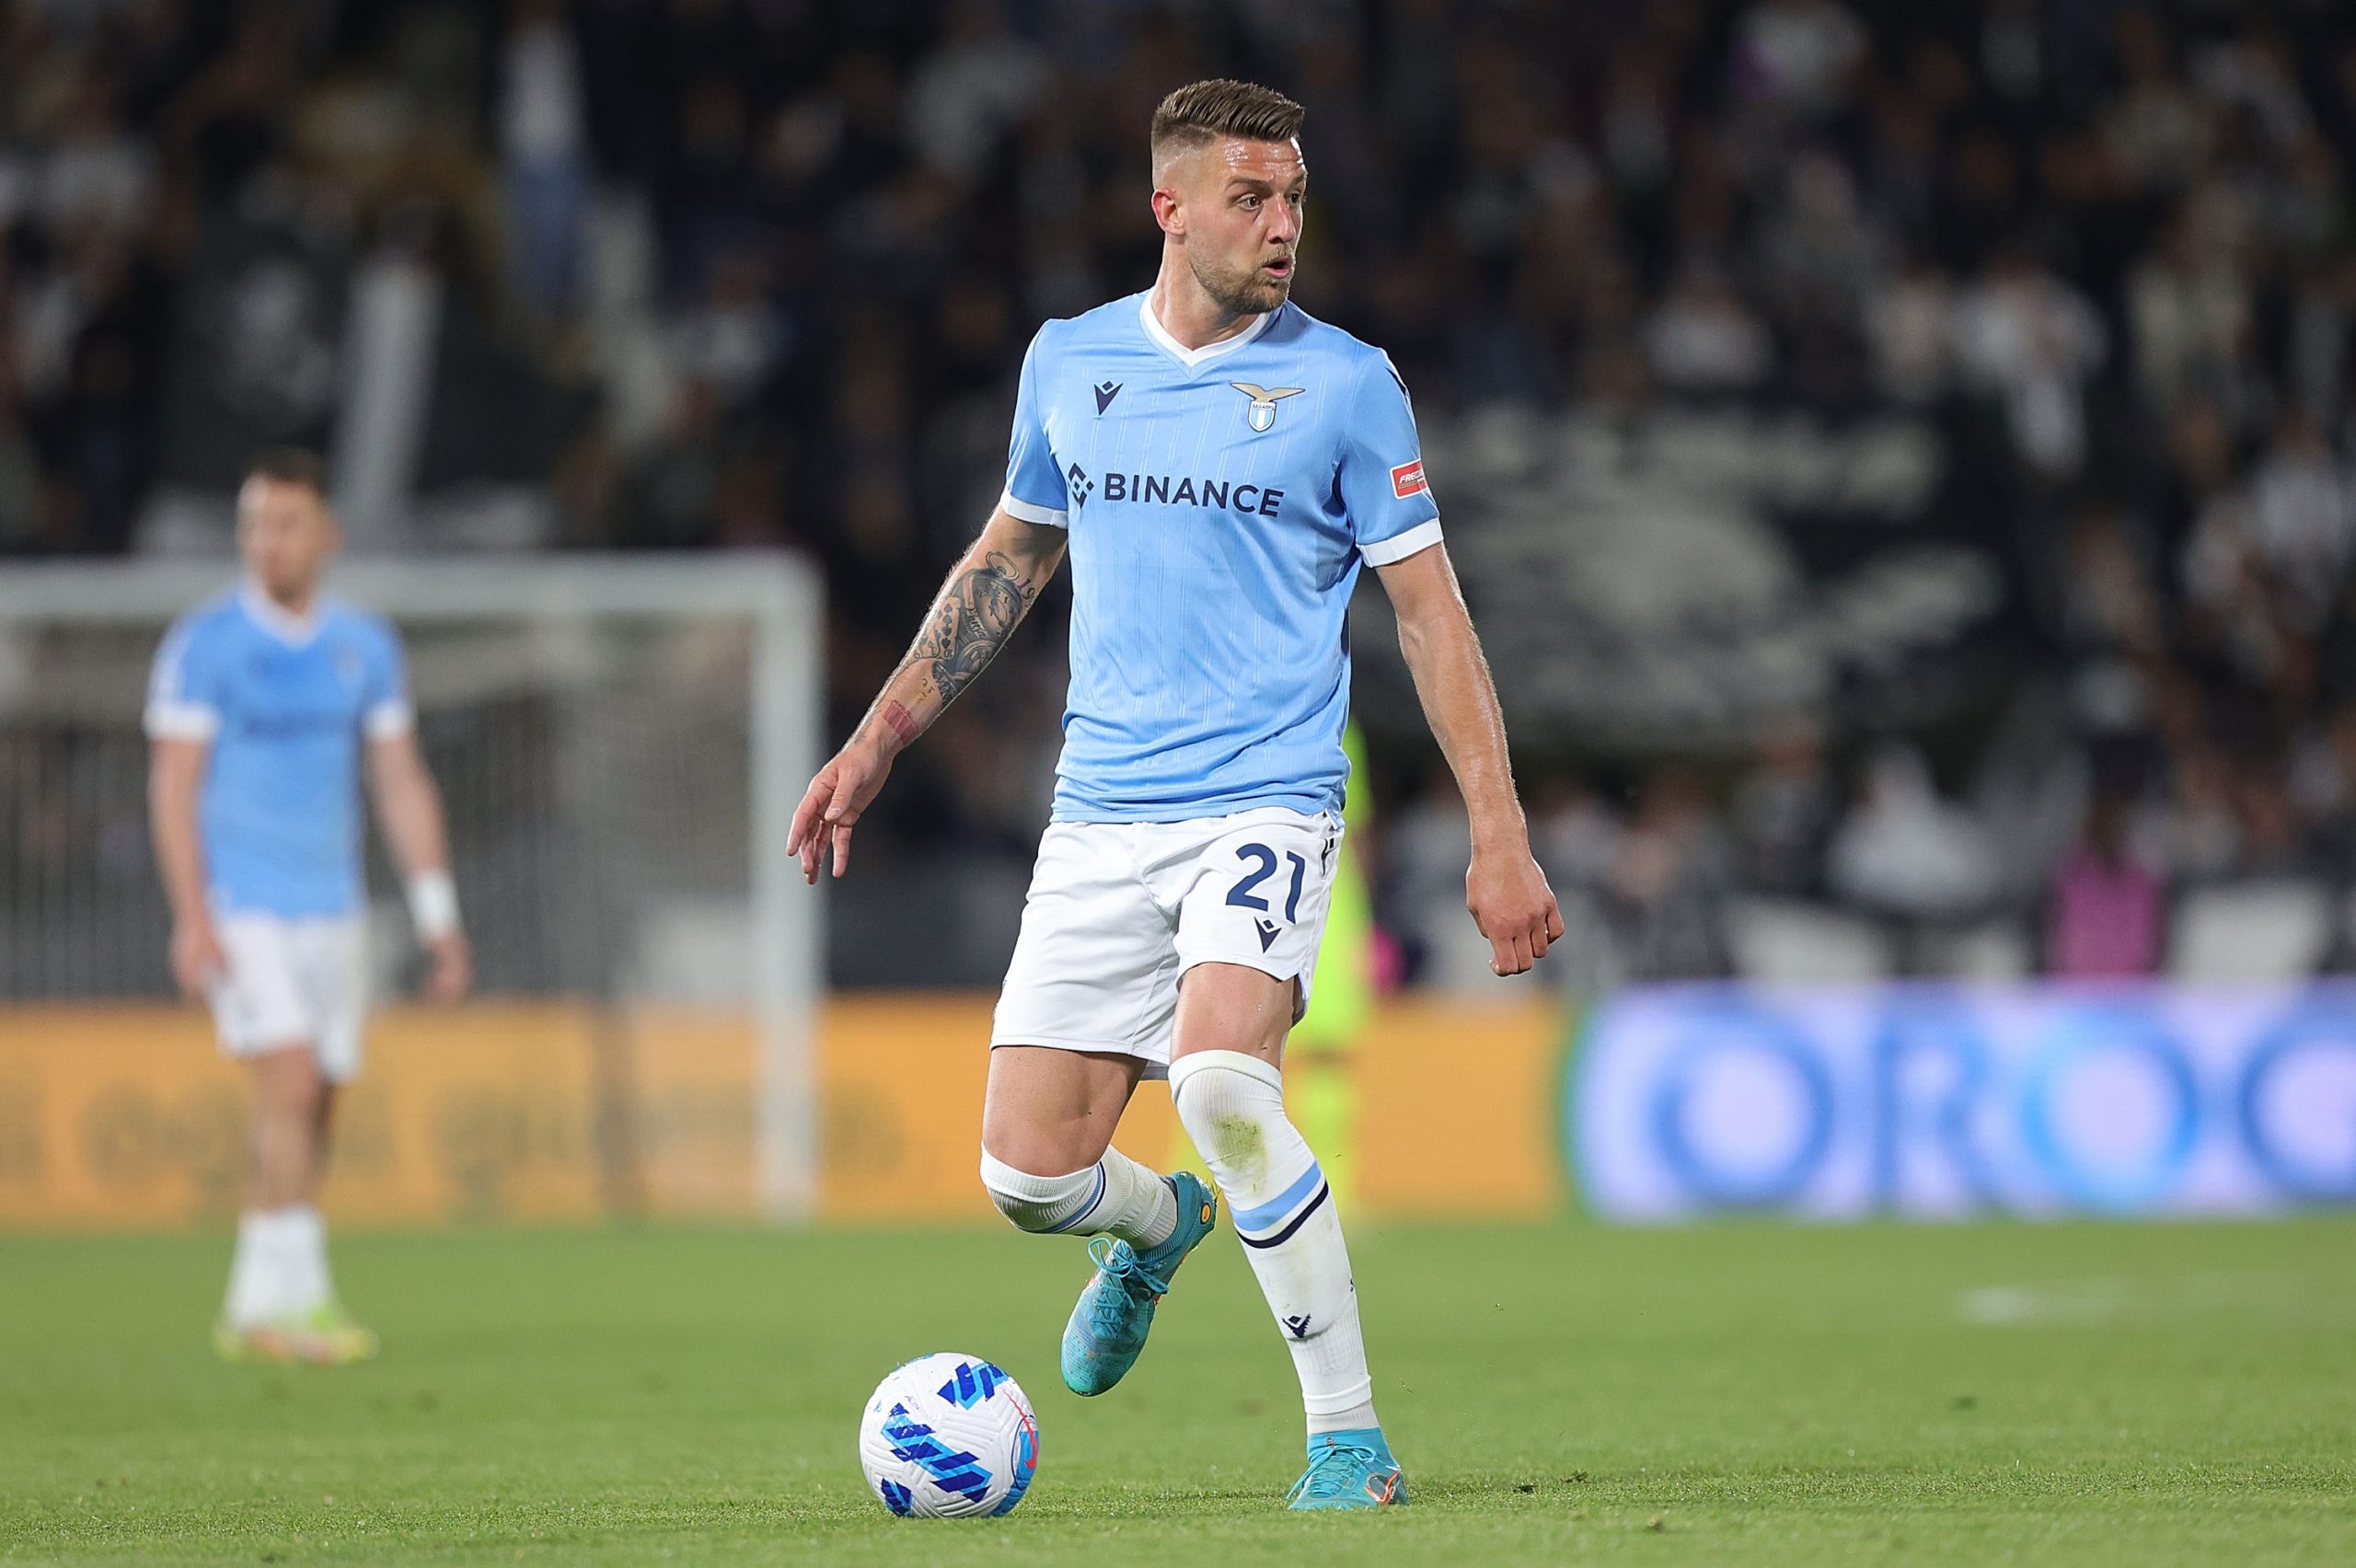 Manchester United are linked with a move for Sergej Milinkovic-Savic this summer. (Photo by Gabriele Maltinti/Getty Images)